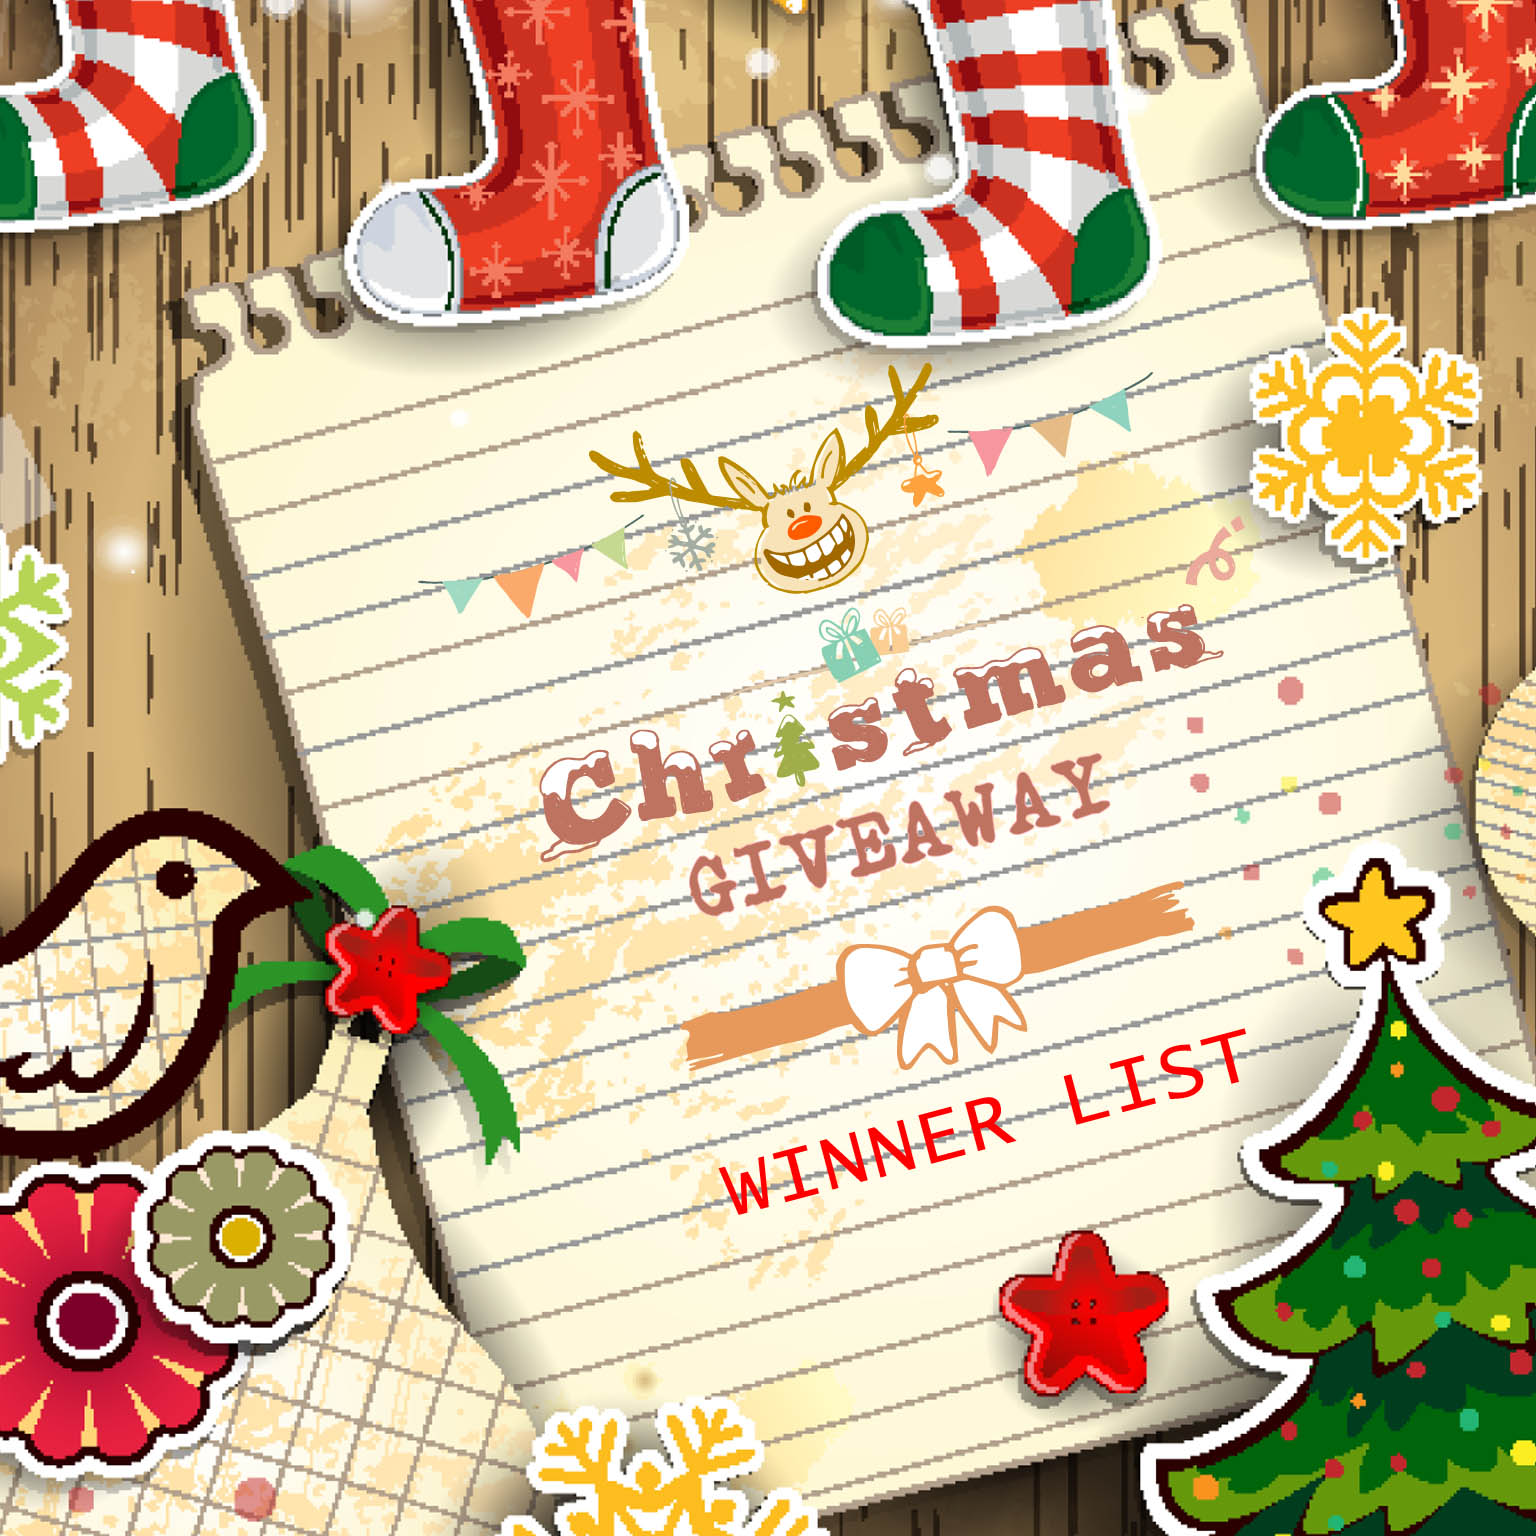 WINNERS OF 12FLY TRAVEL APP ISSUE #28 CHRISTMAS GIVEAWAY